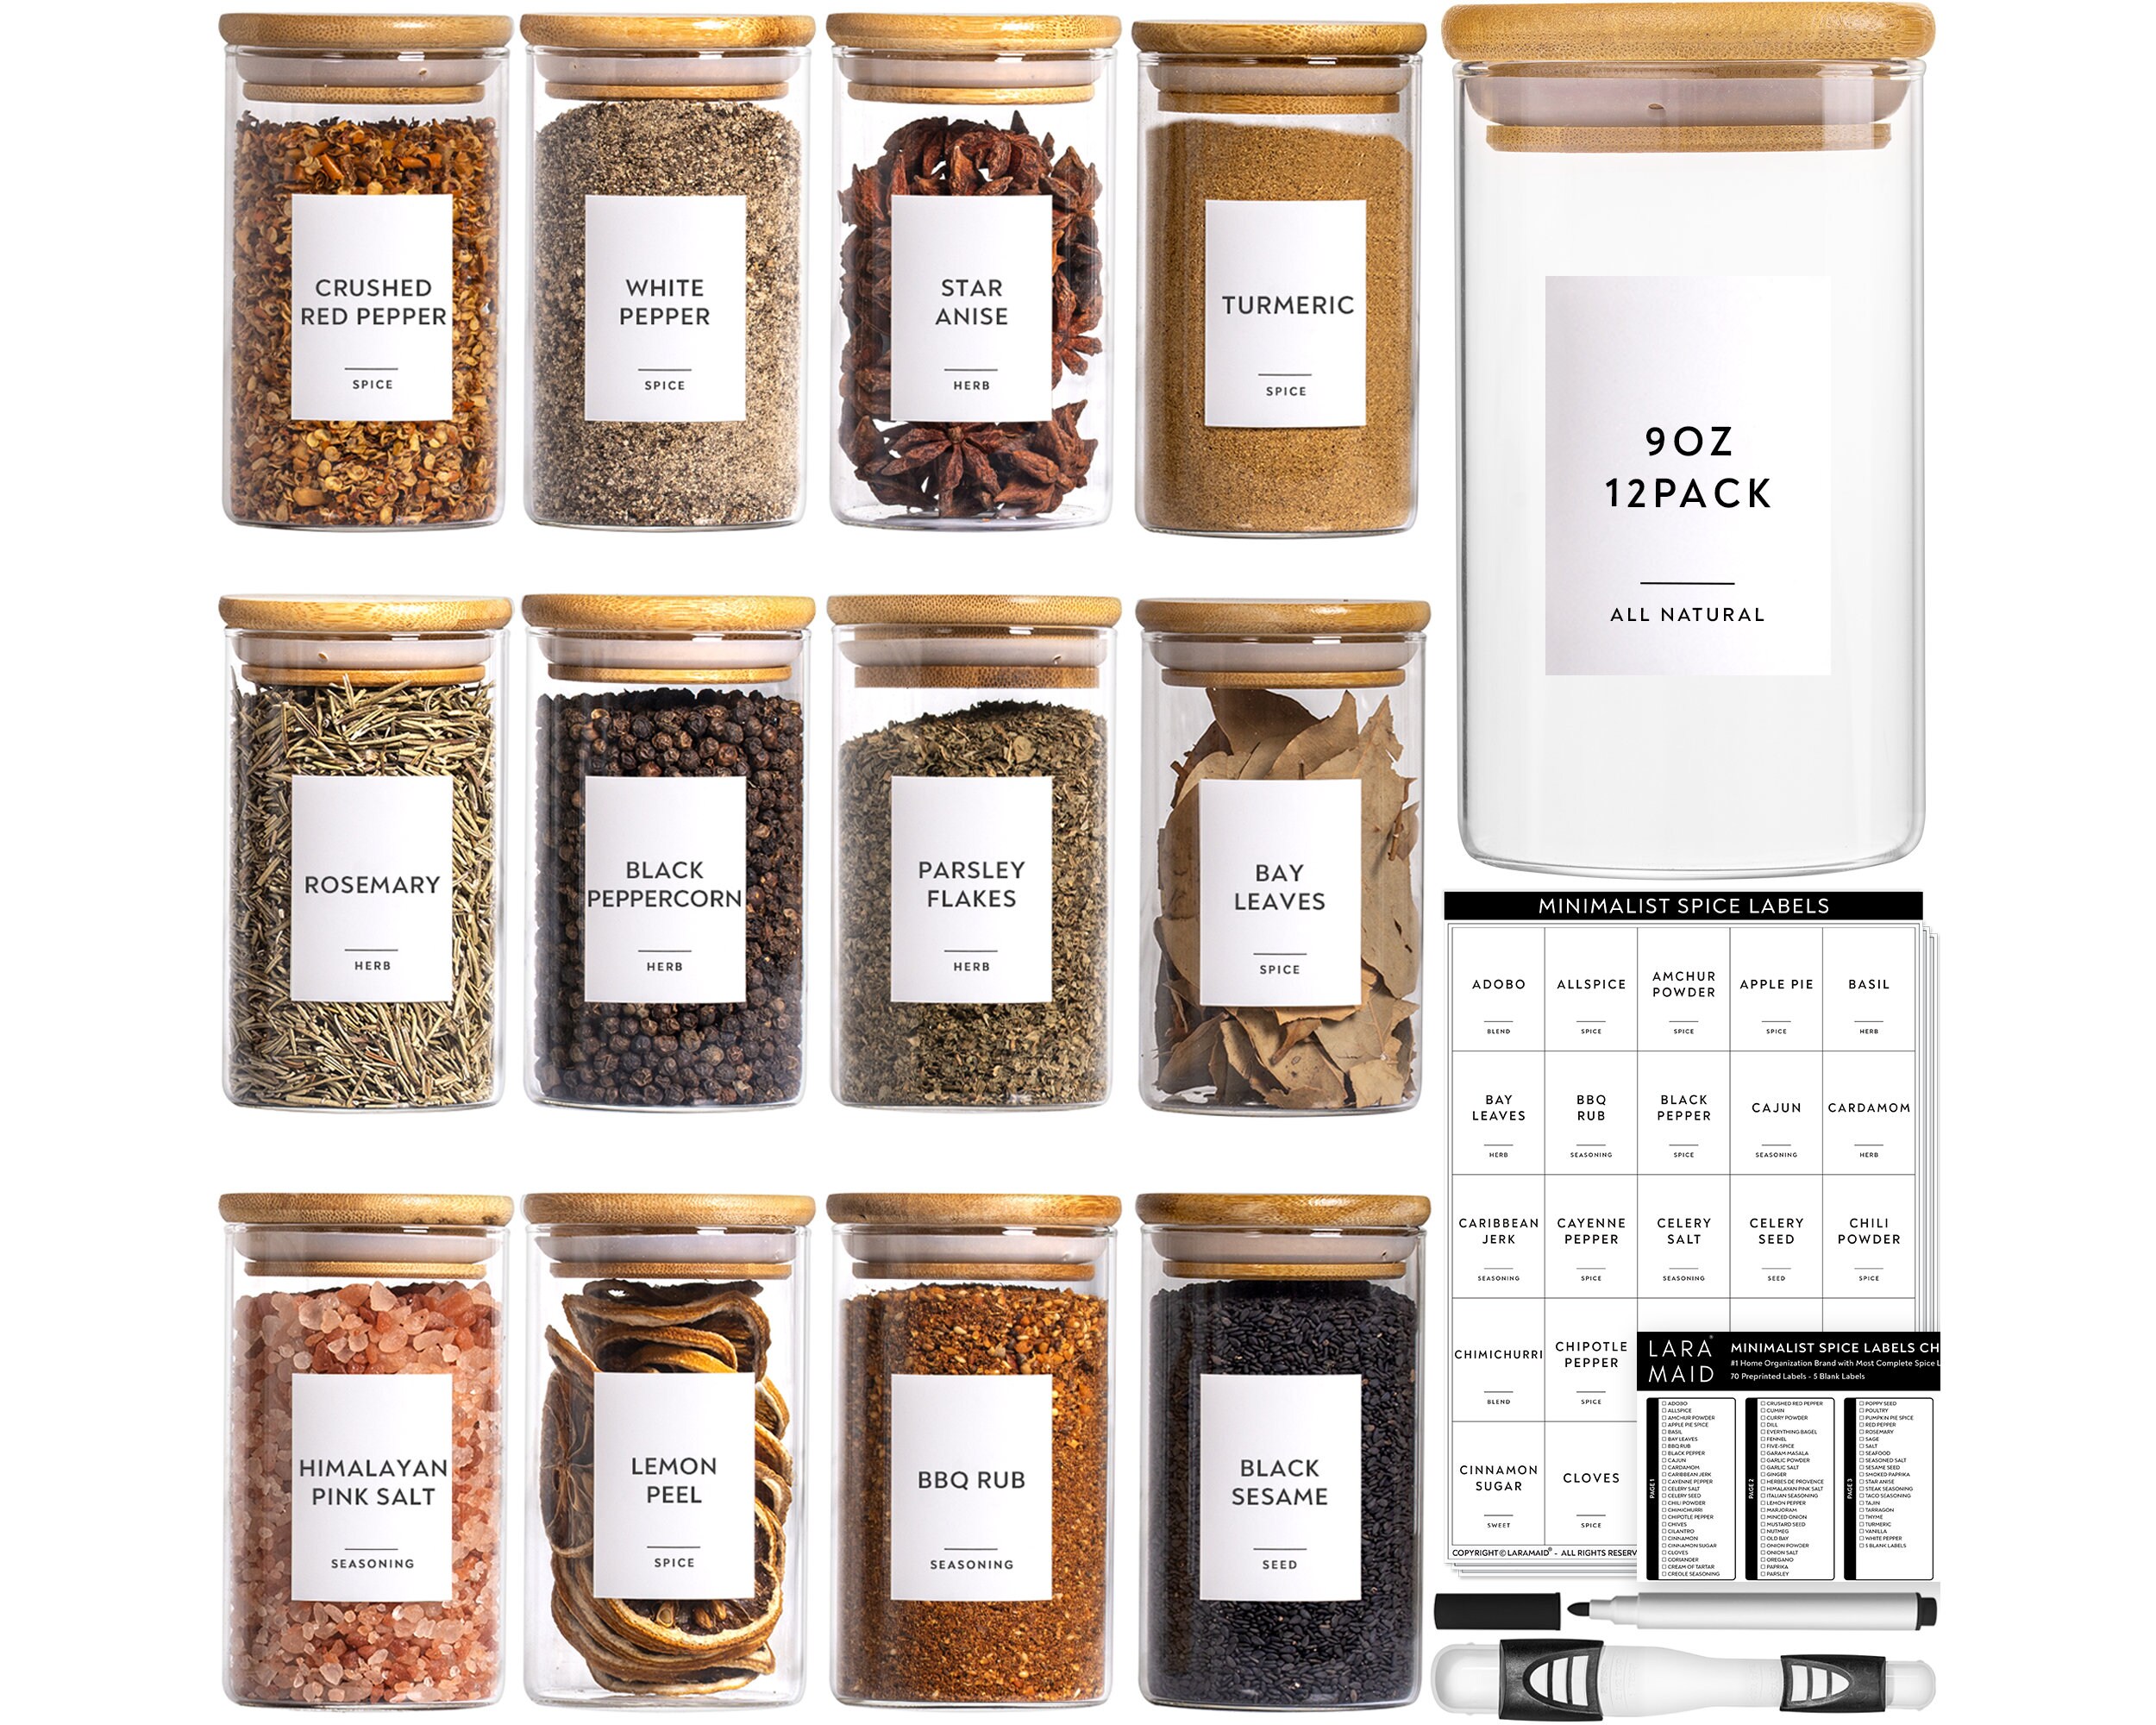 Talented Kitchen 8 Pack Large Glass Spice Bottles with 239 Preprinted Label  Stickers, 8 Ounce Empty Square Seasoning Jars with Shaker Lids & Silver  Airtight Caps